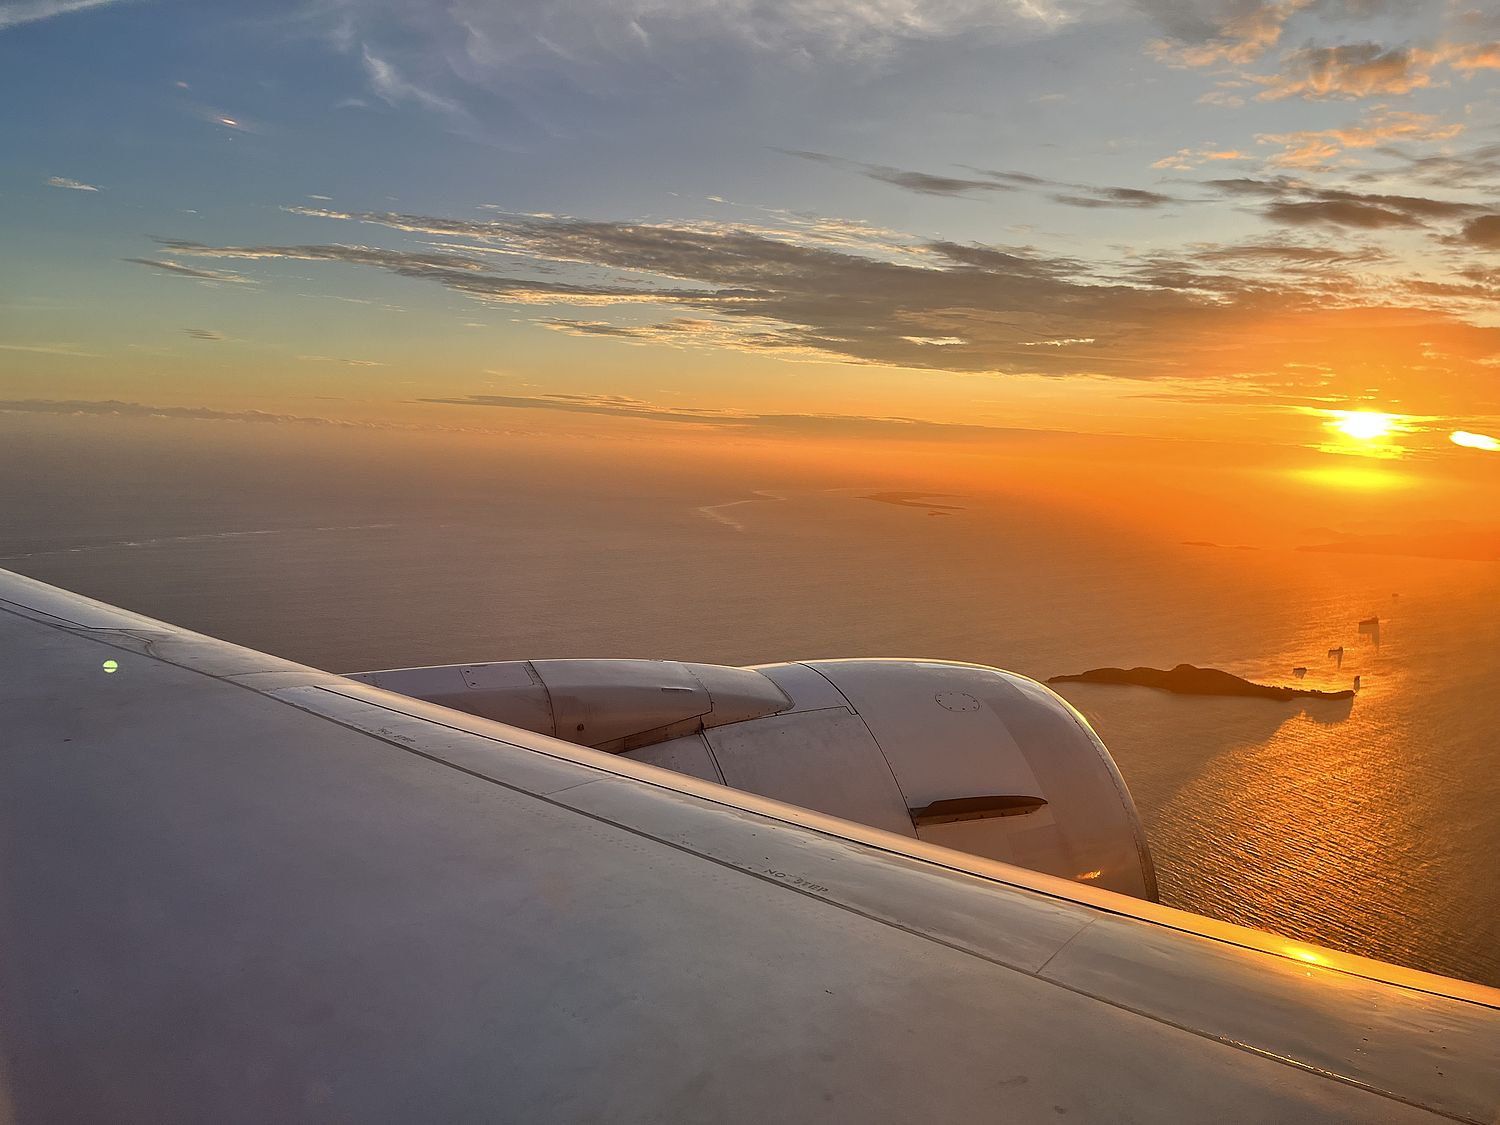 Ocean sunset with islands seen over an airplane wing with jet engine.